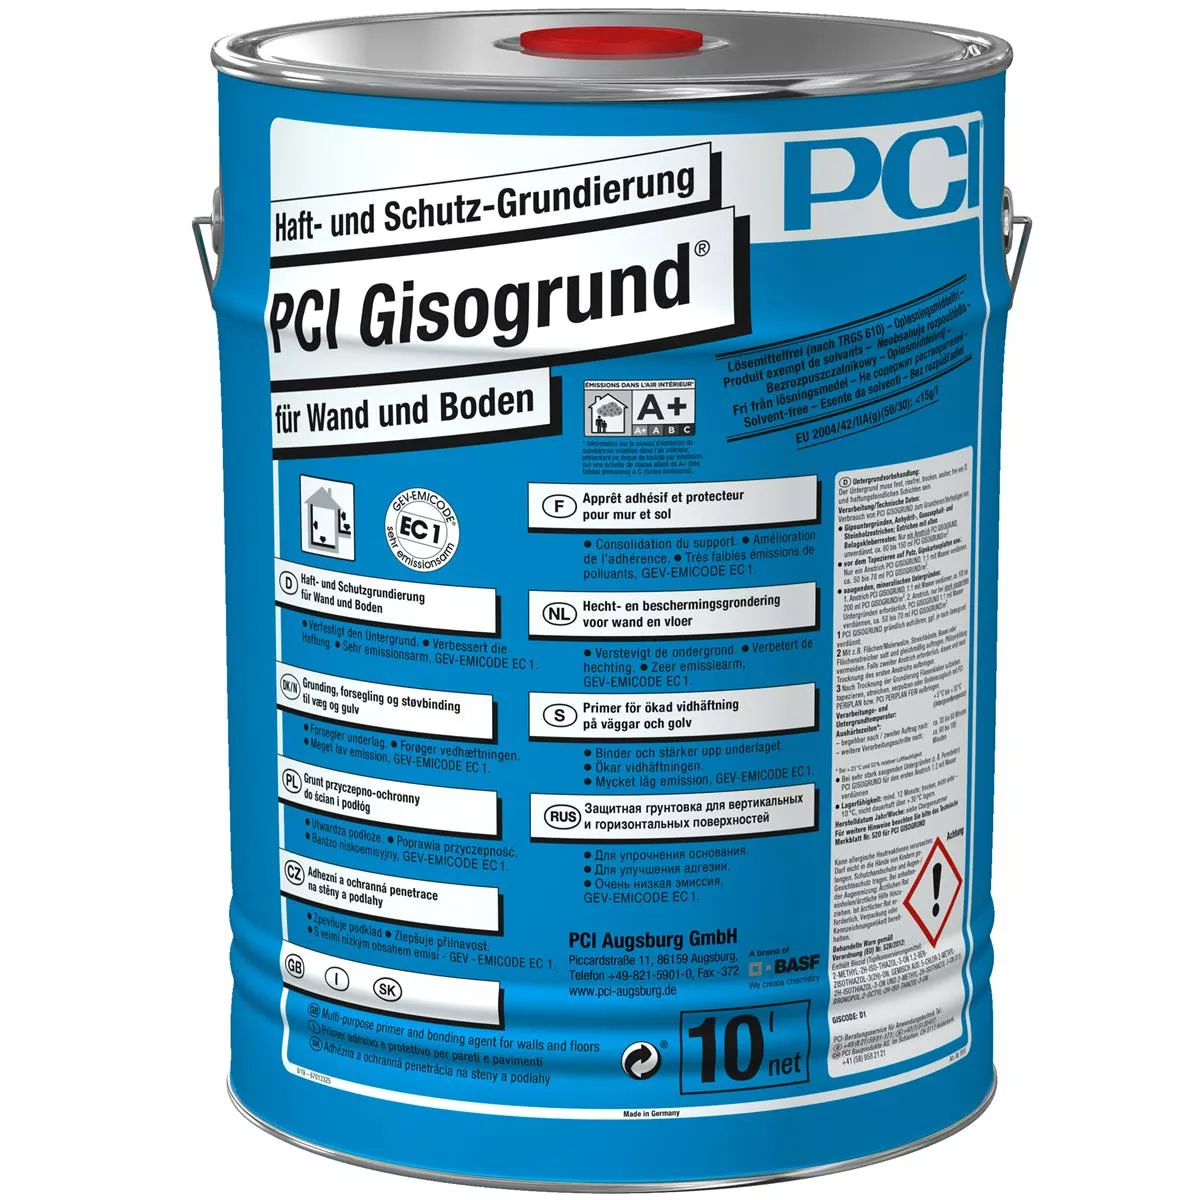 PCI Gisogrund adhesive and protective primer blue 10 liters